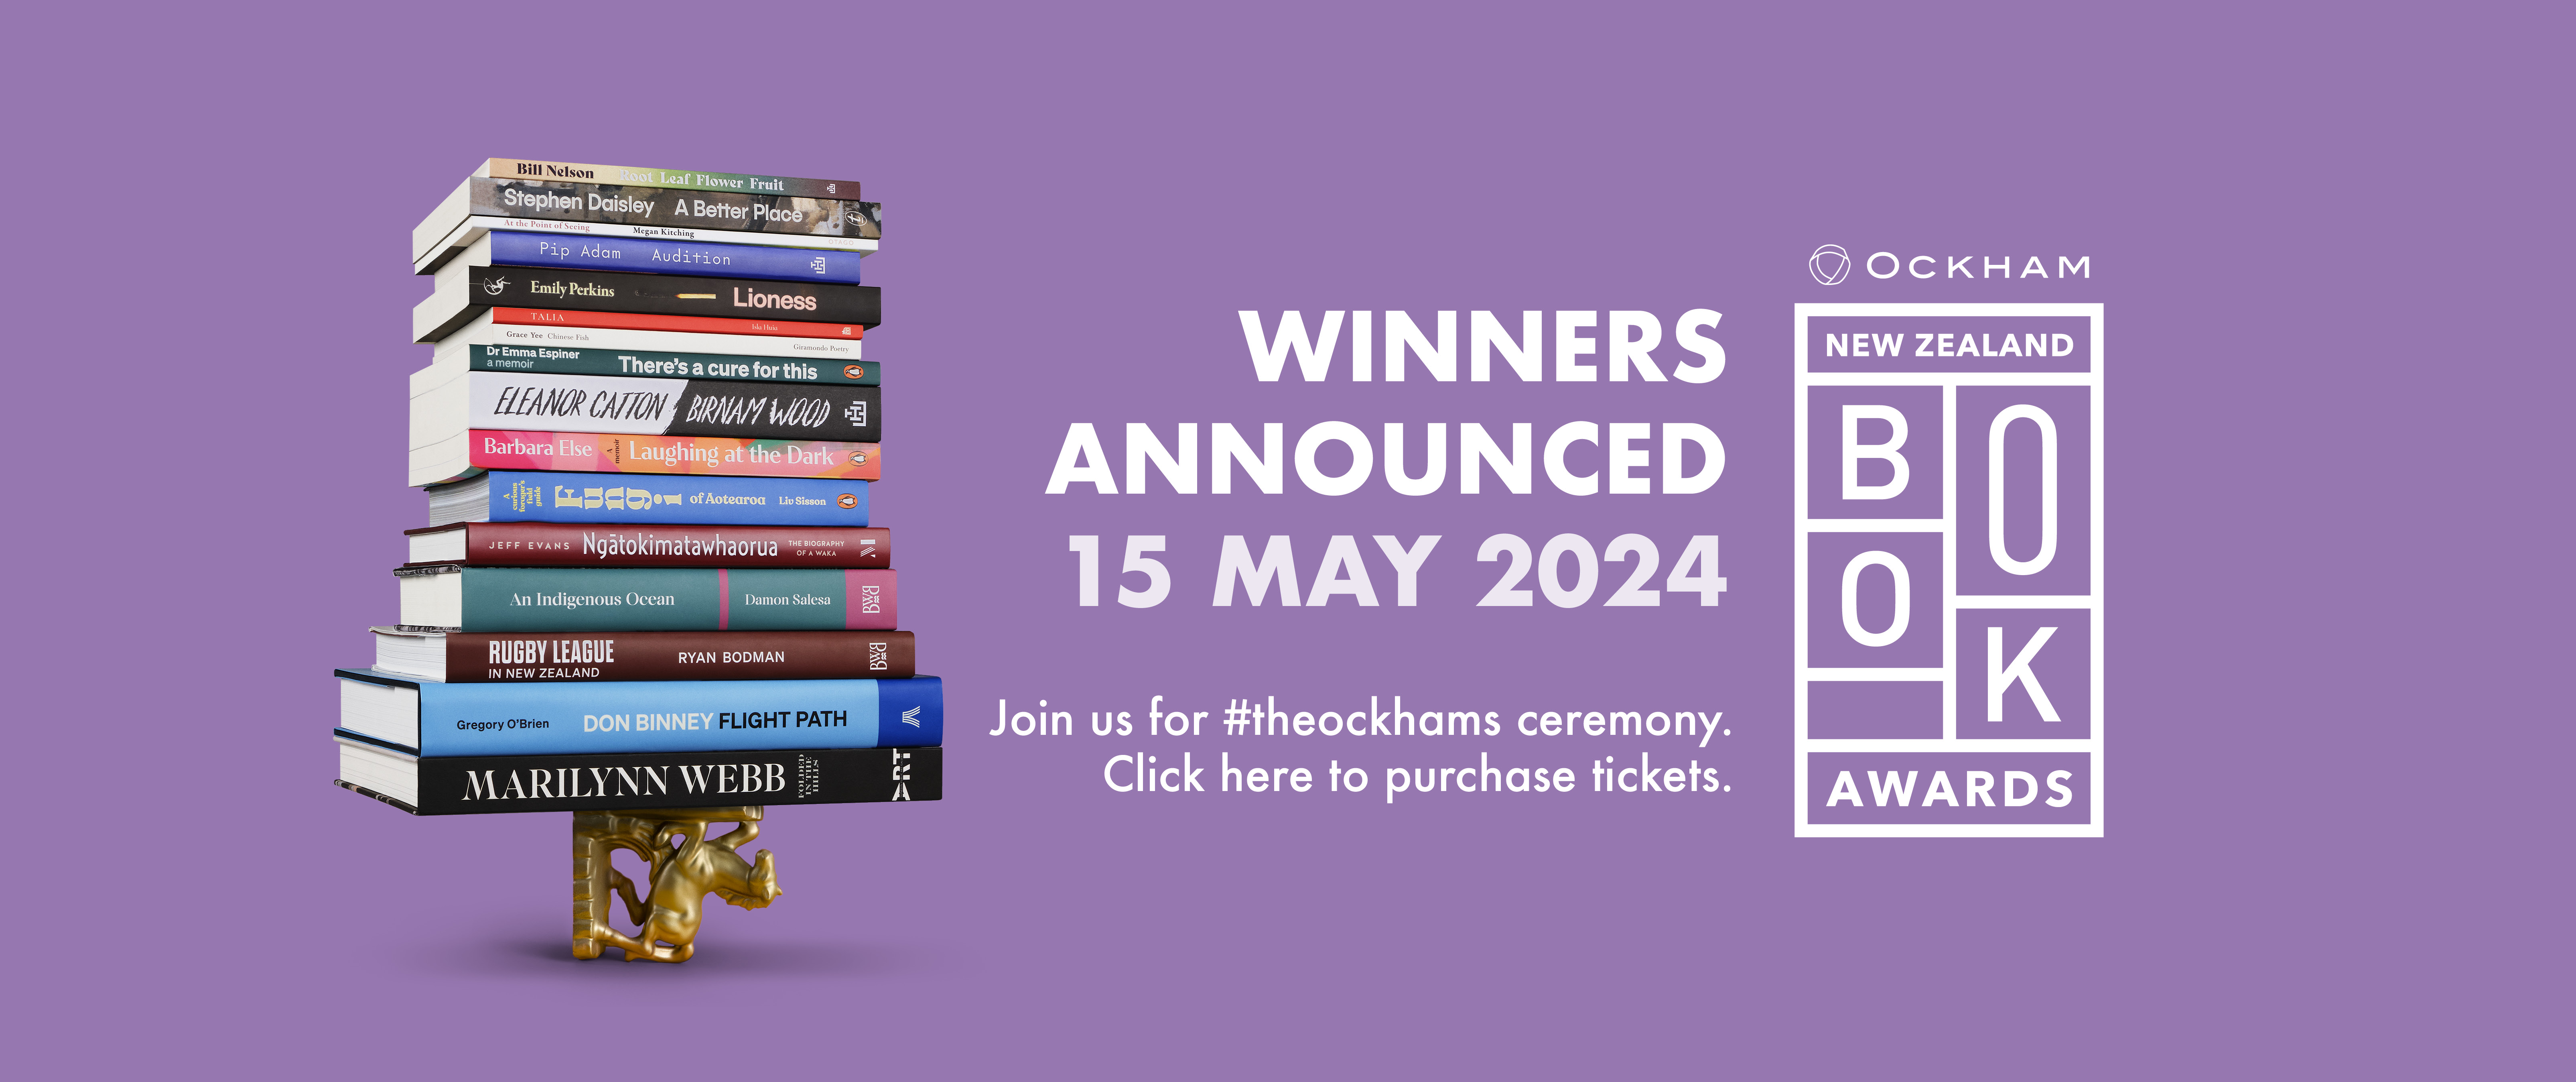 2024 Winners announced 15 May 2024 - Purchase tickets